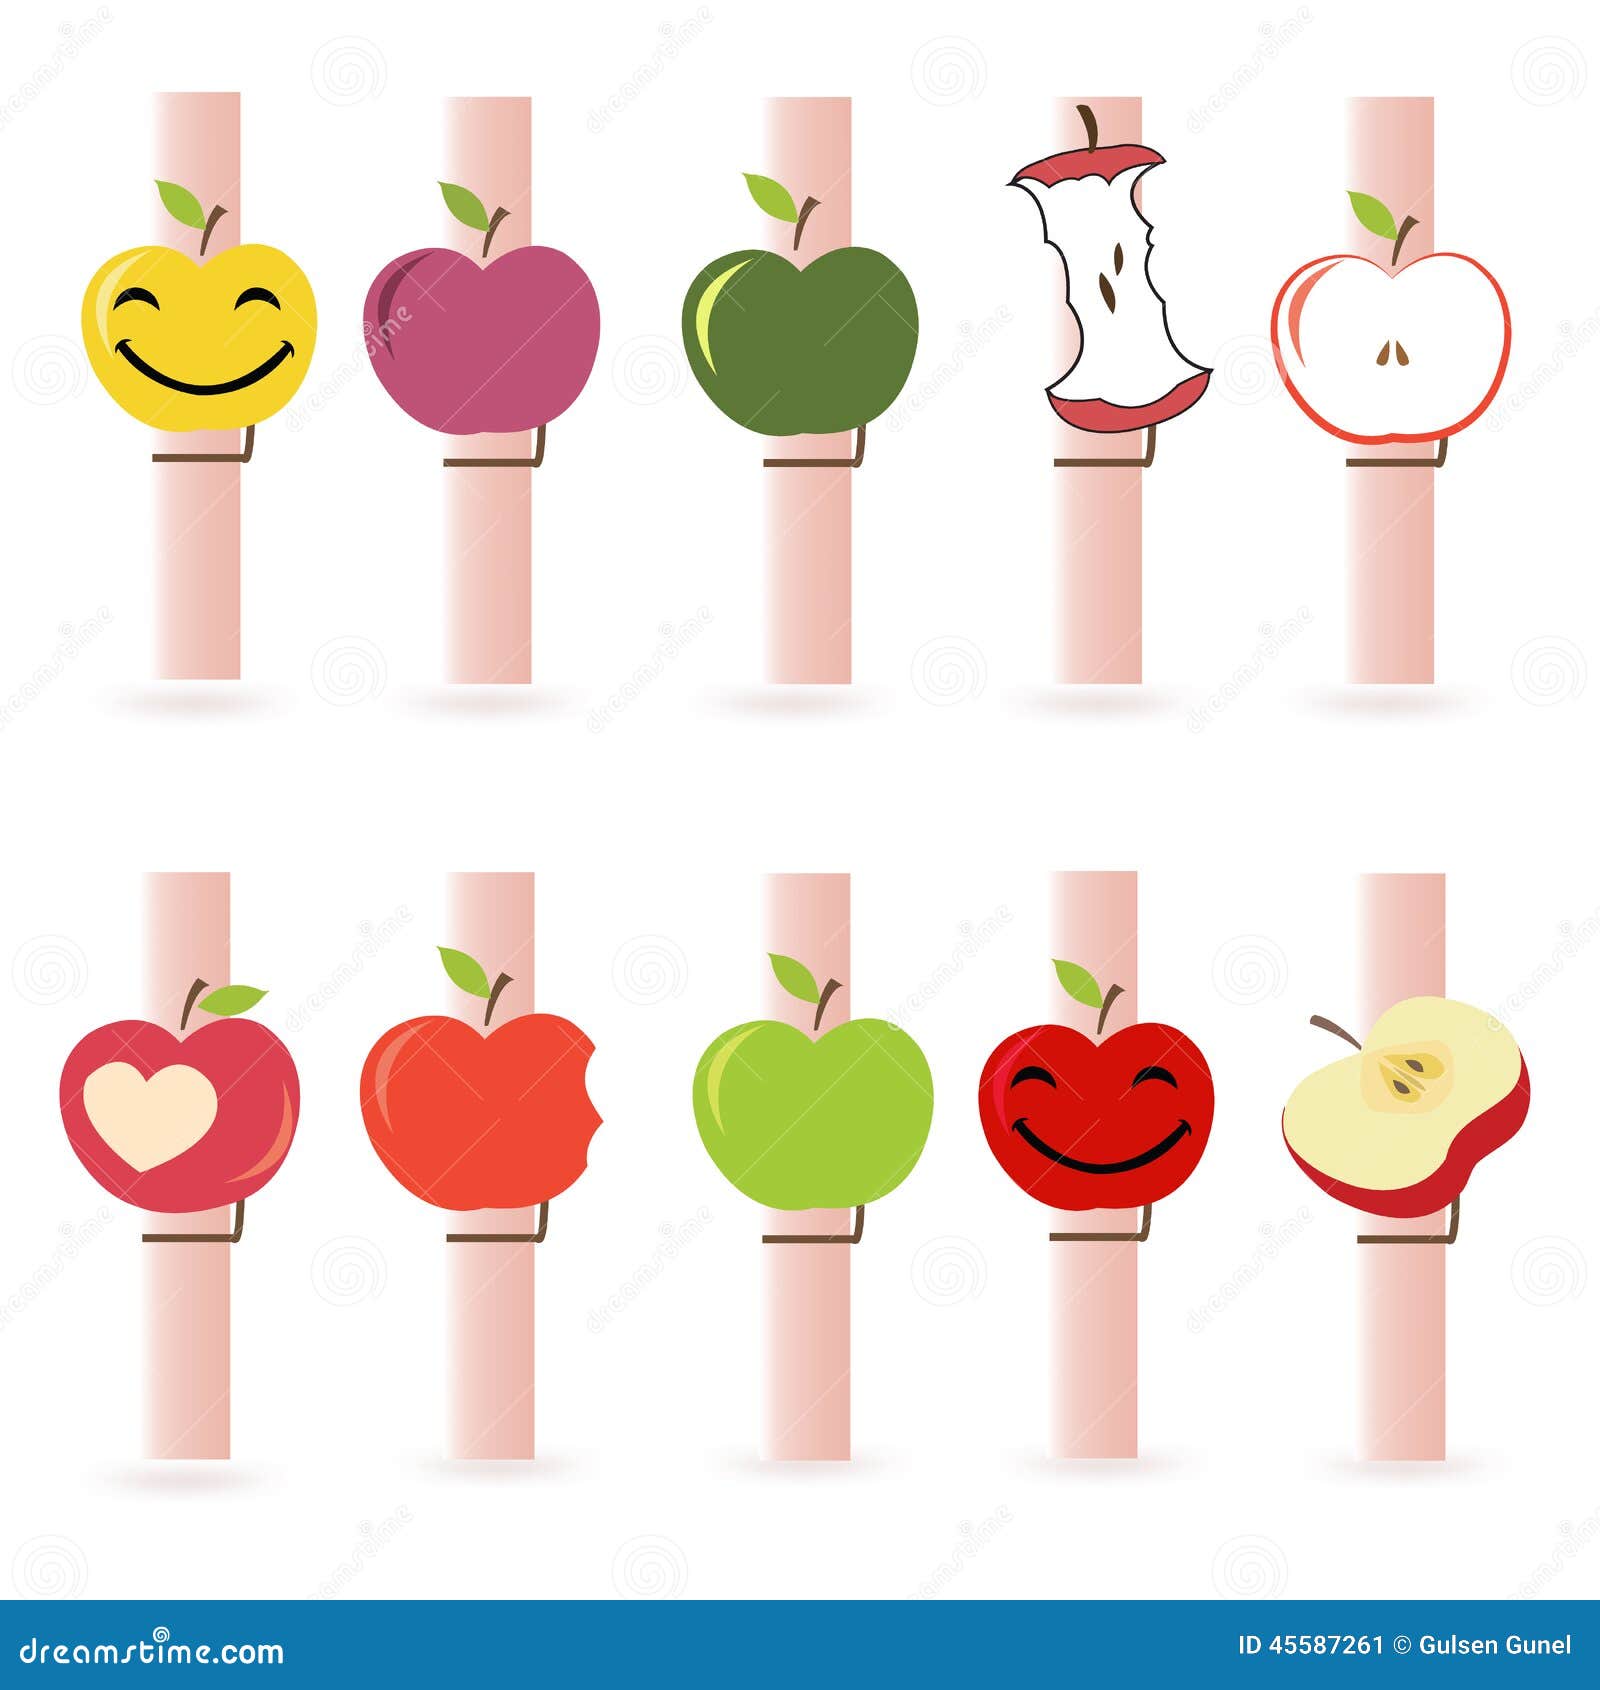 clothespin with colorful funy apple 